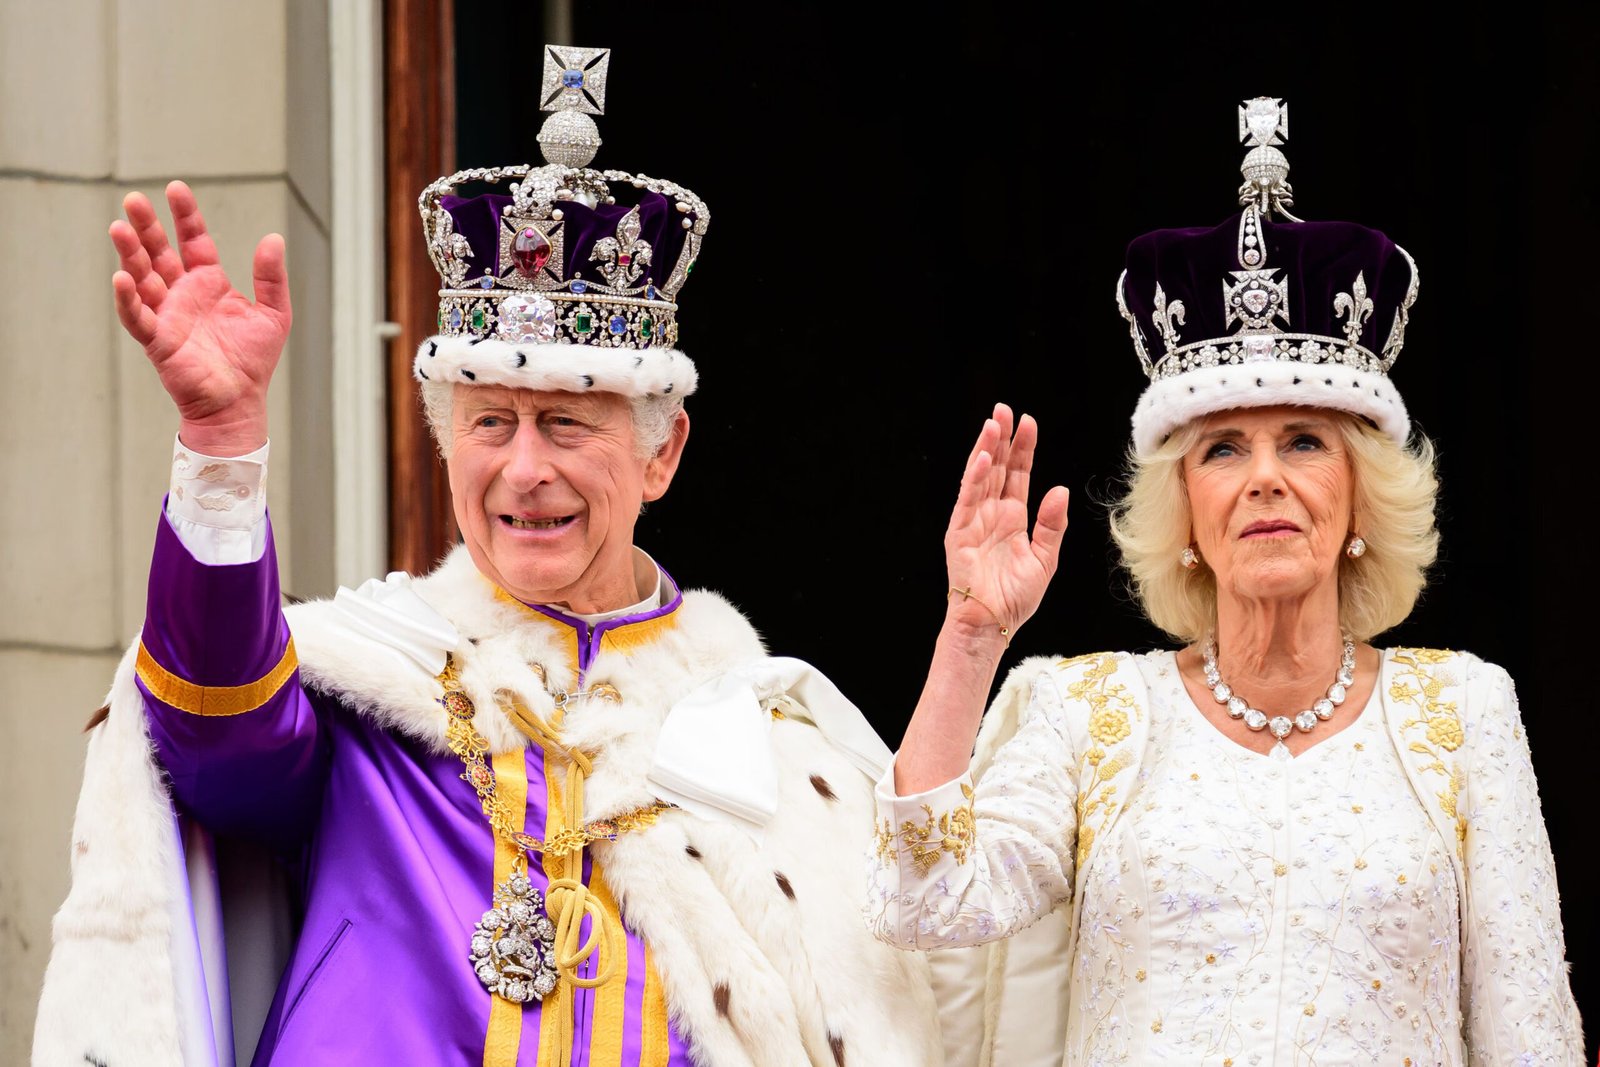 King Charles III wears a crown at Britain's State Opening